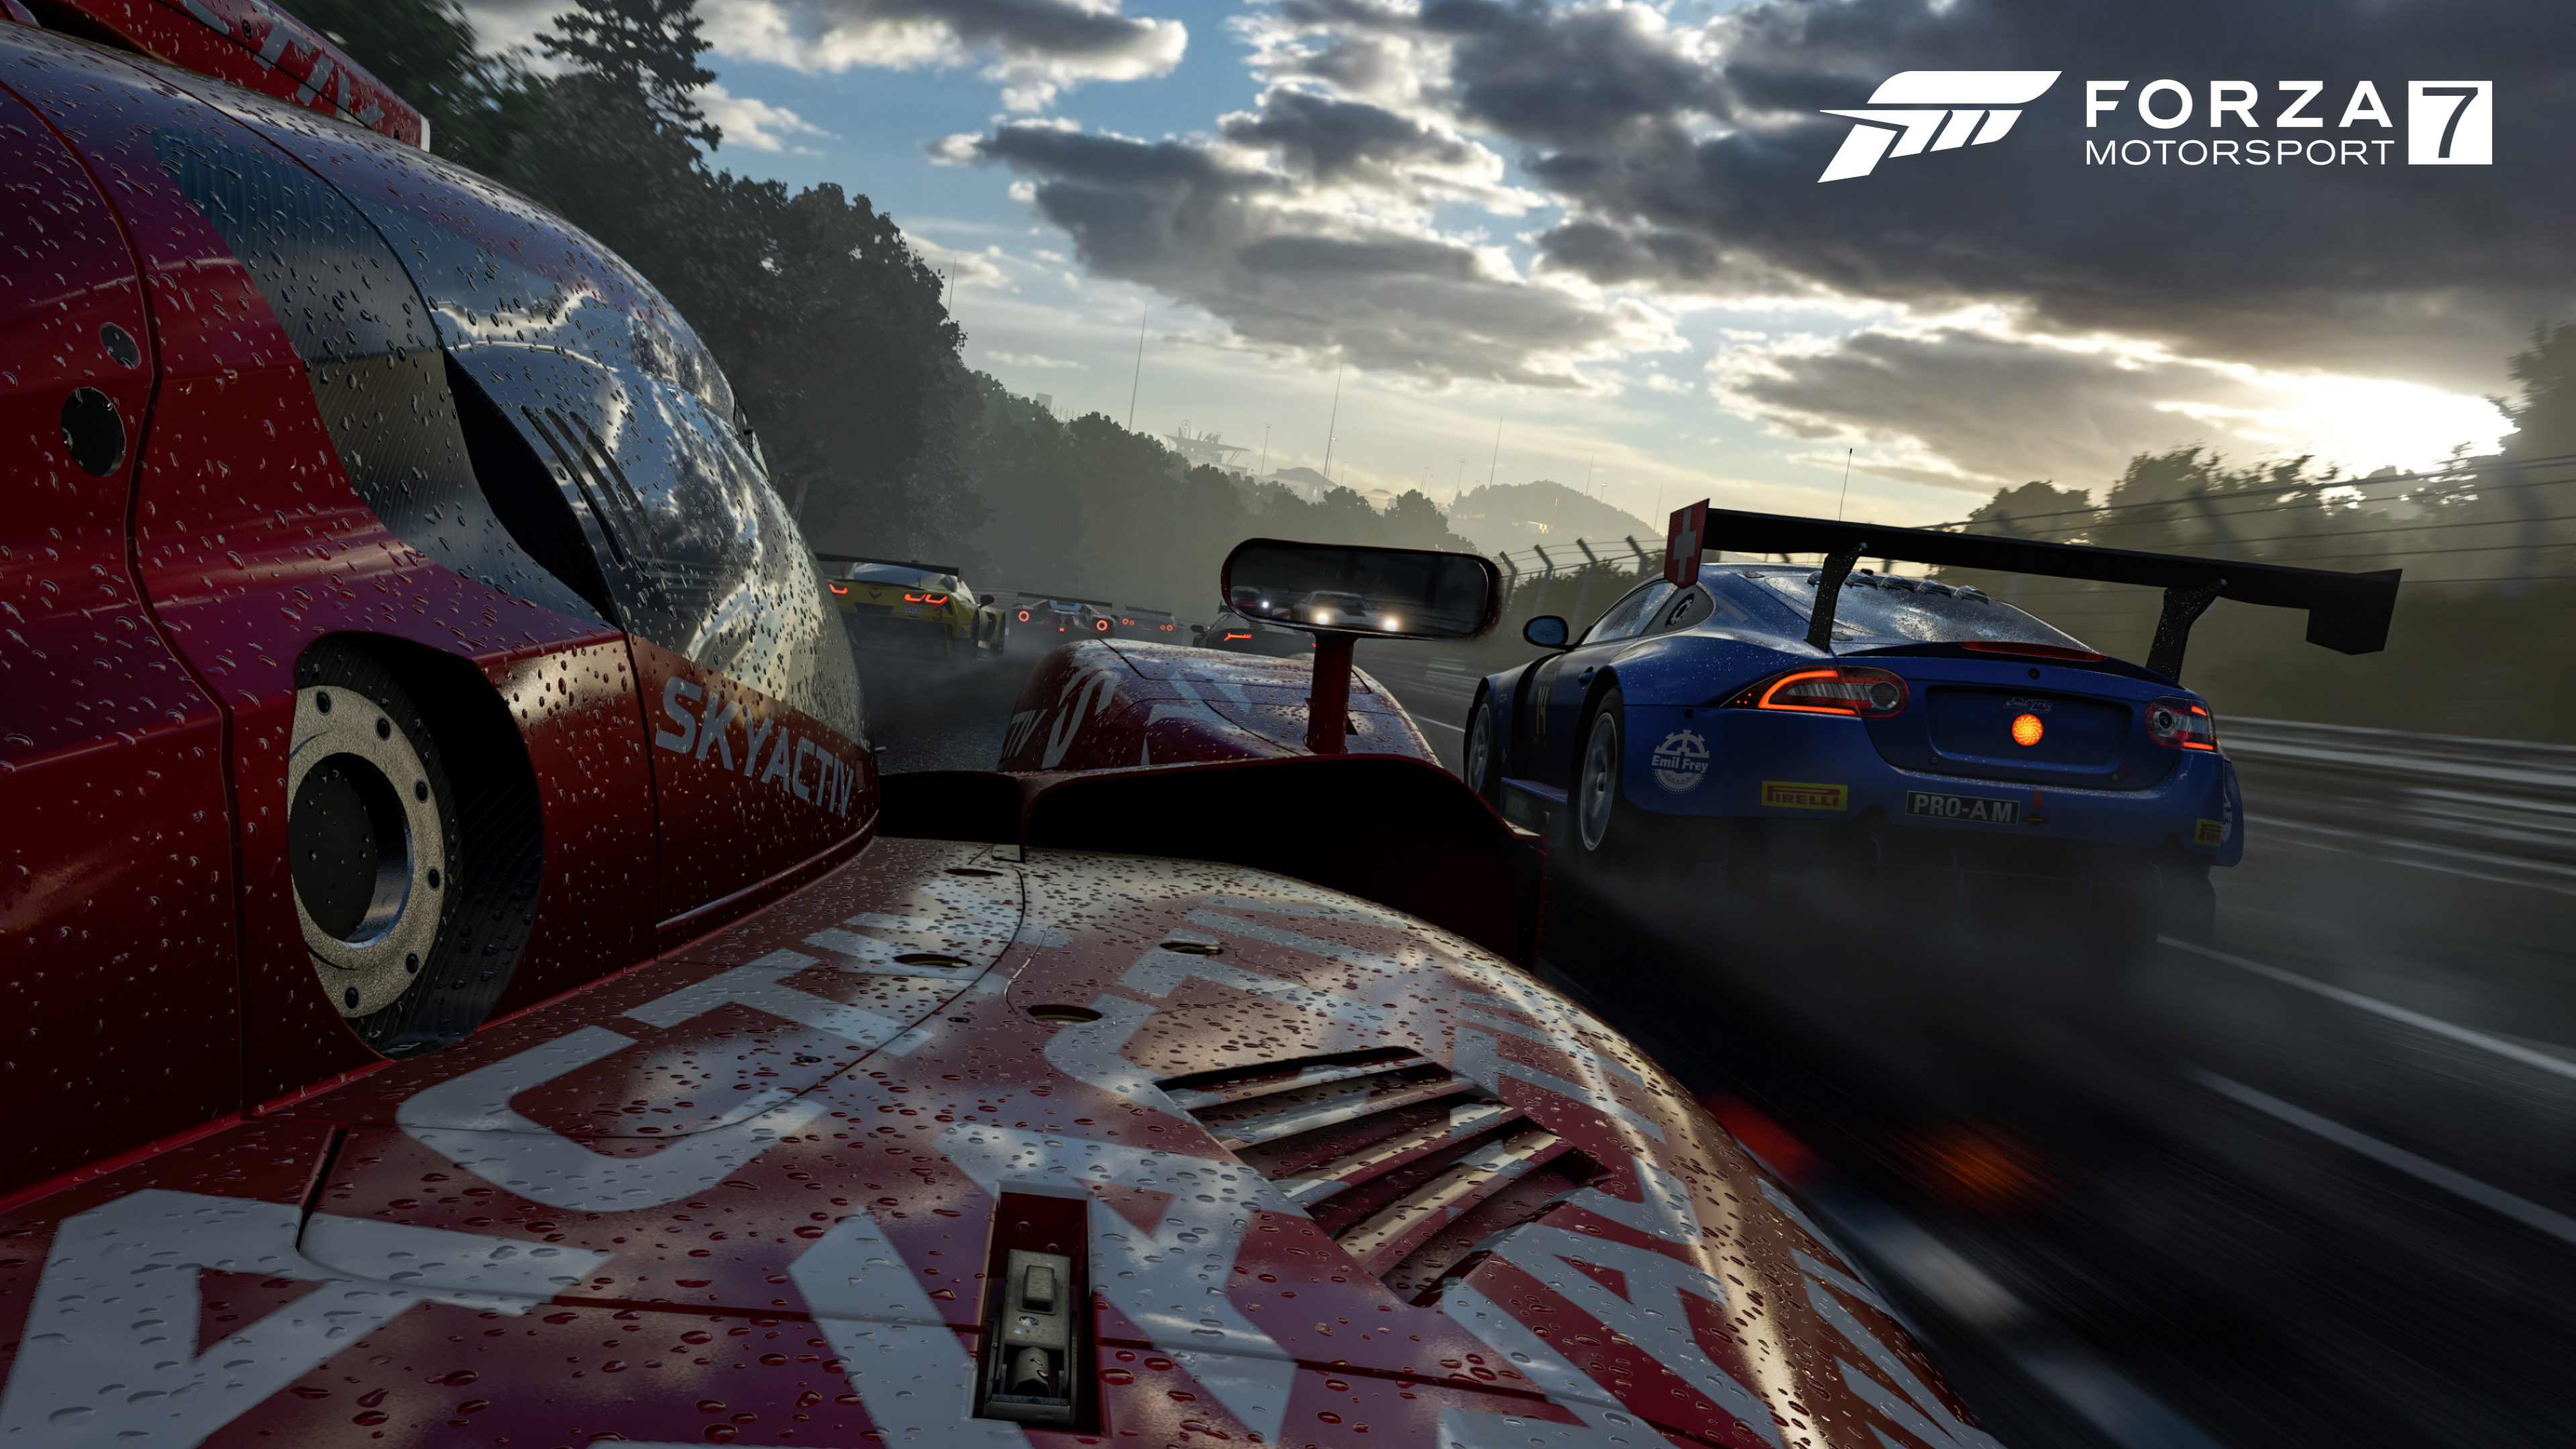 Forza Motorsport 7 Pc Requirements Released Alongside A List